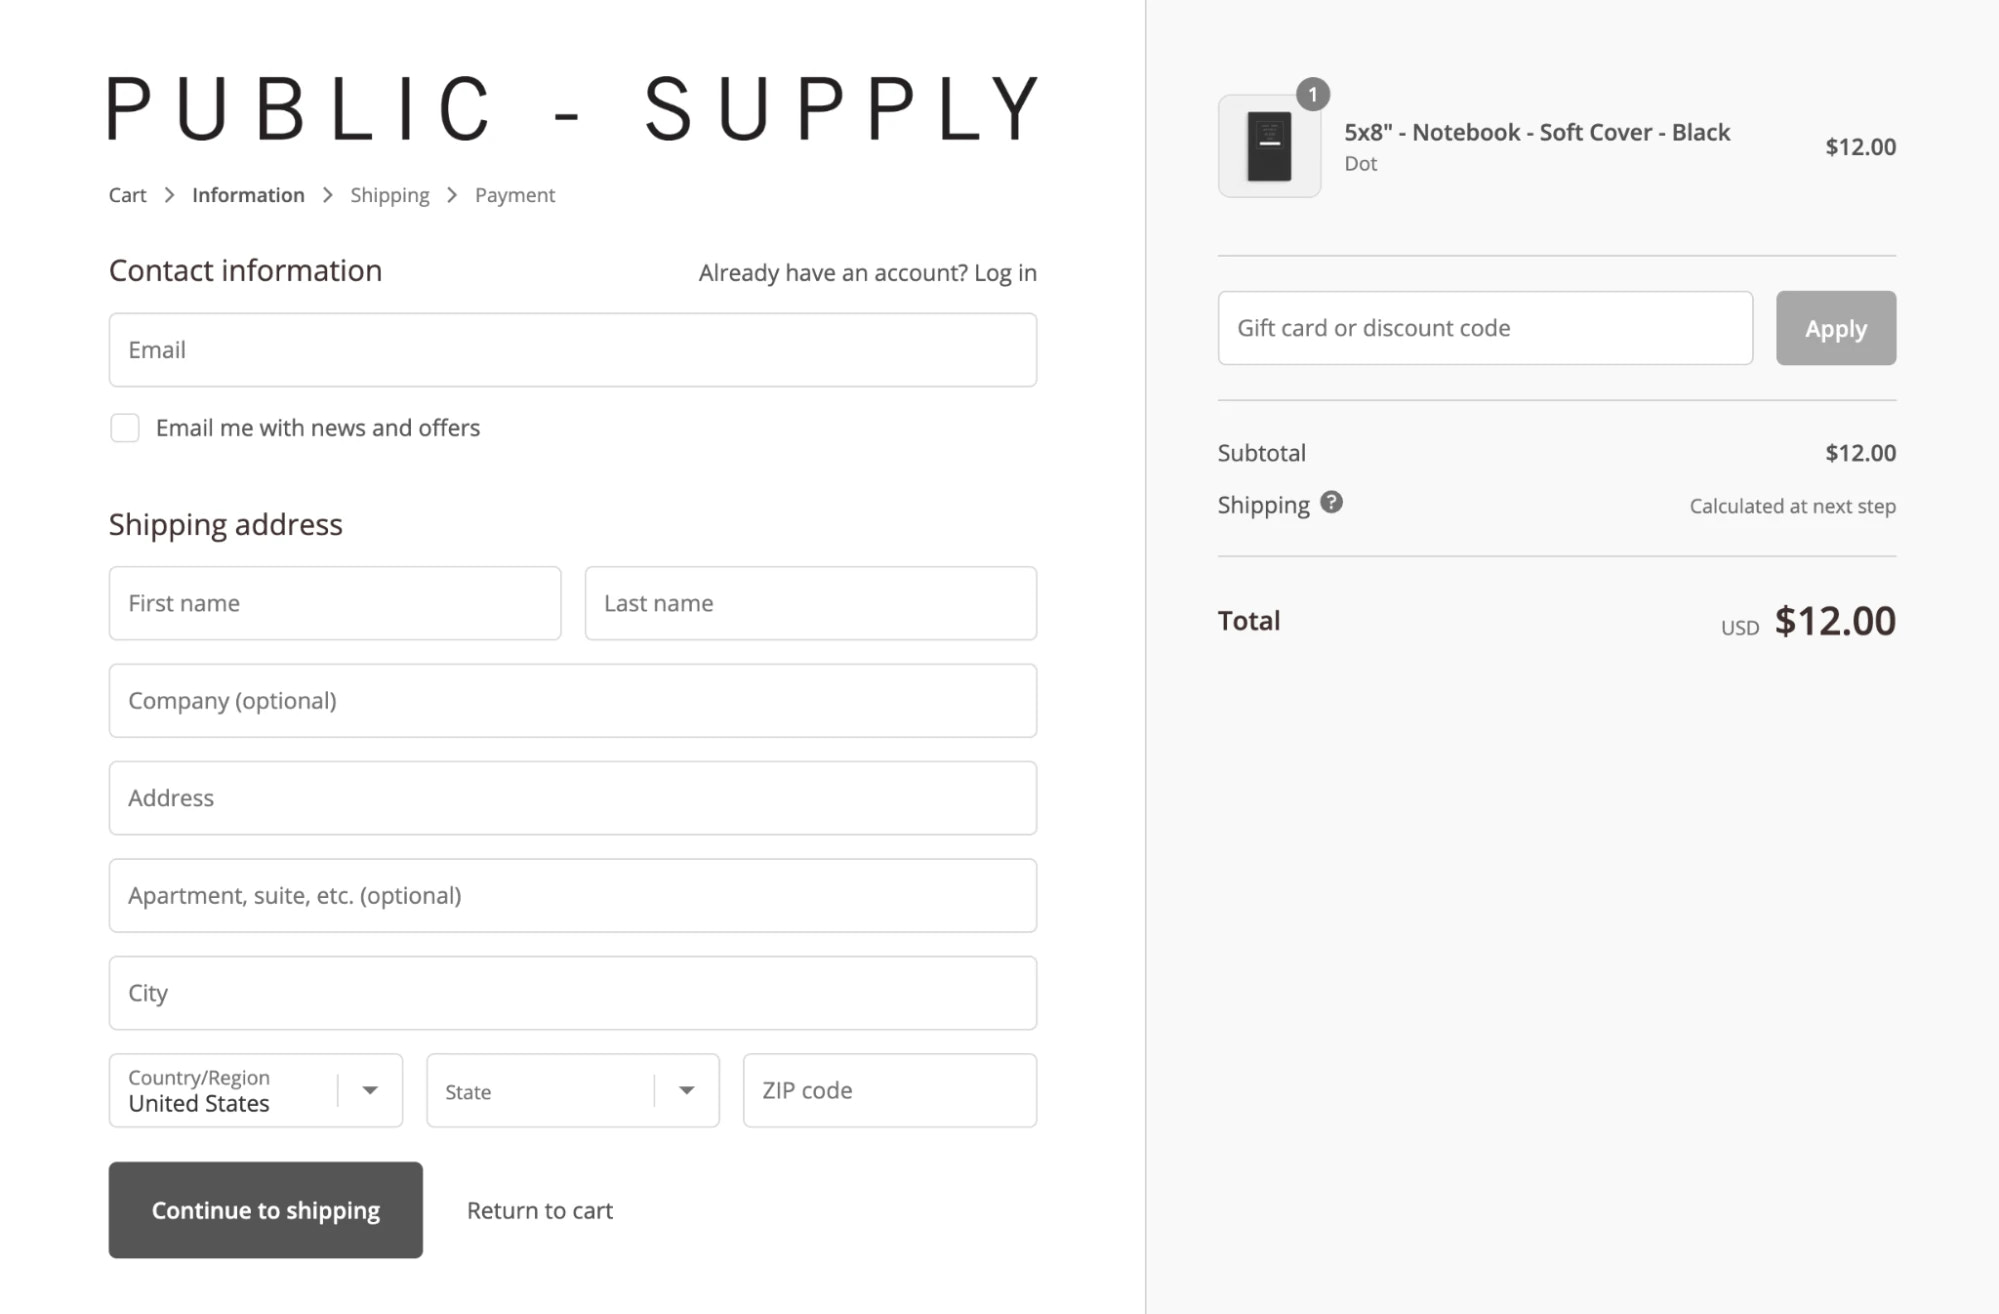 How to Design an E-commerce Checkout Flow - 23 Tactics to Boost Sales